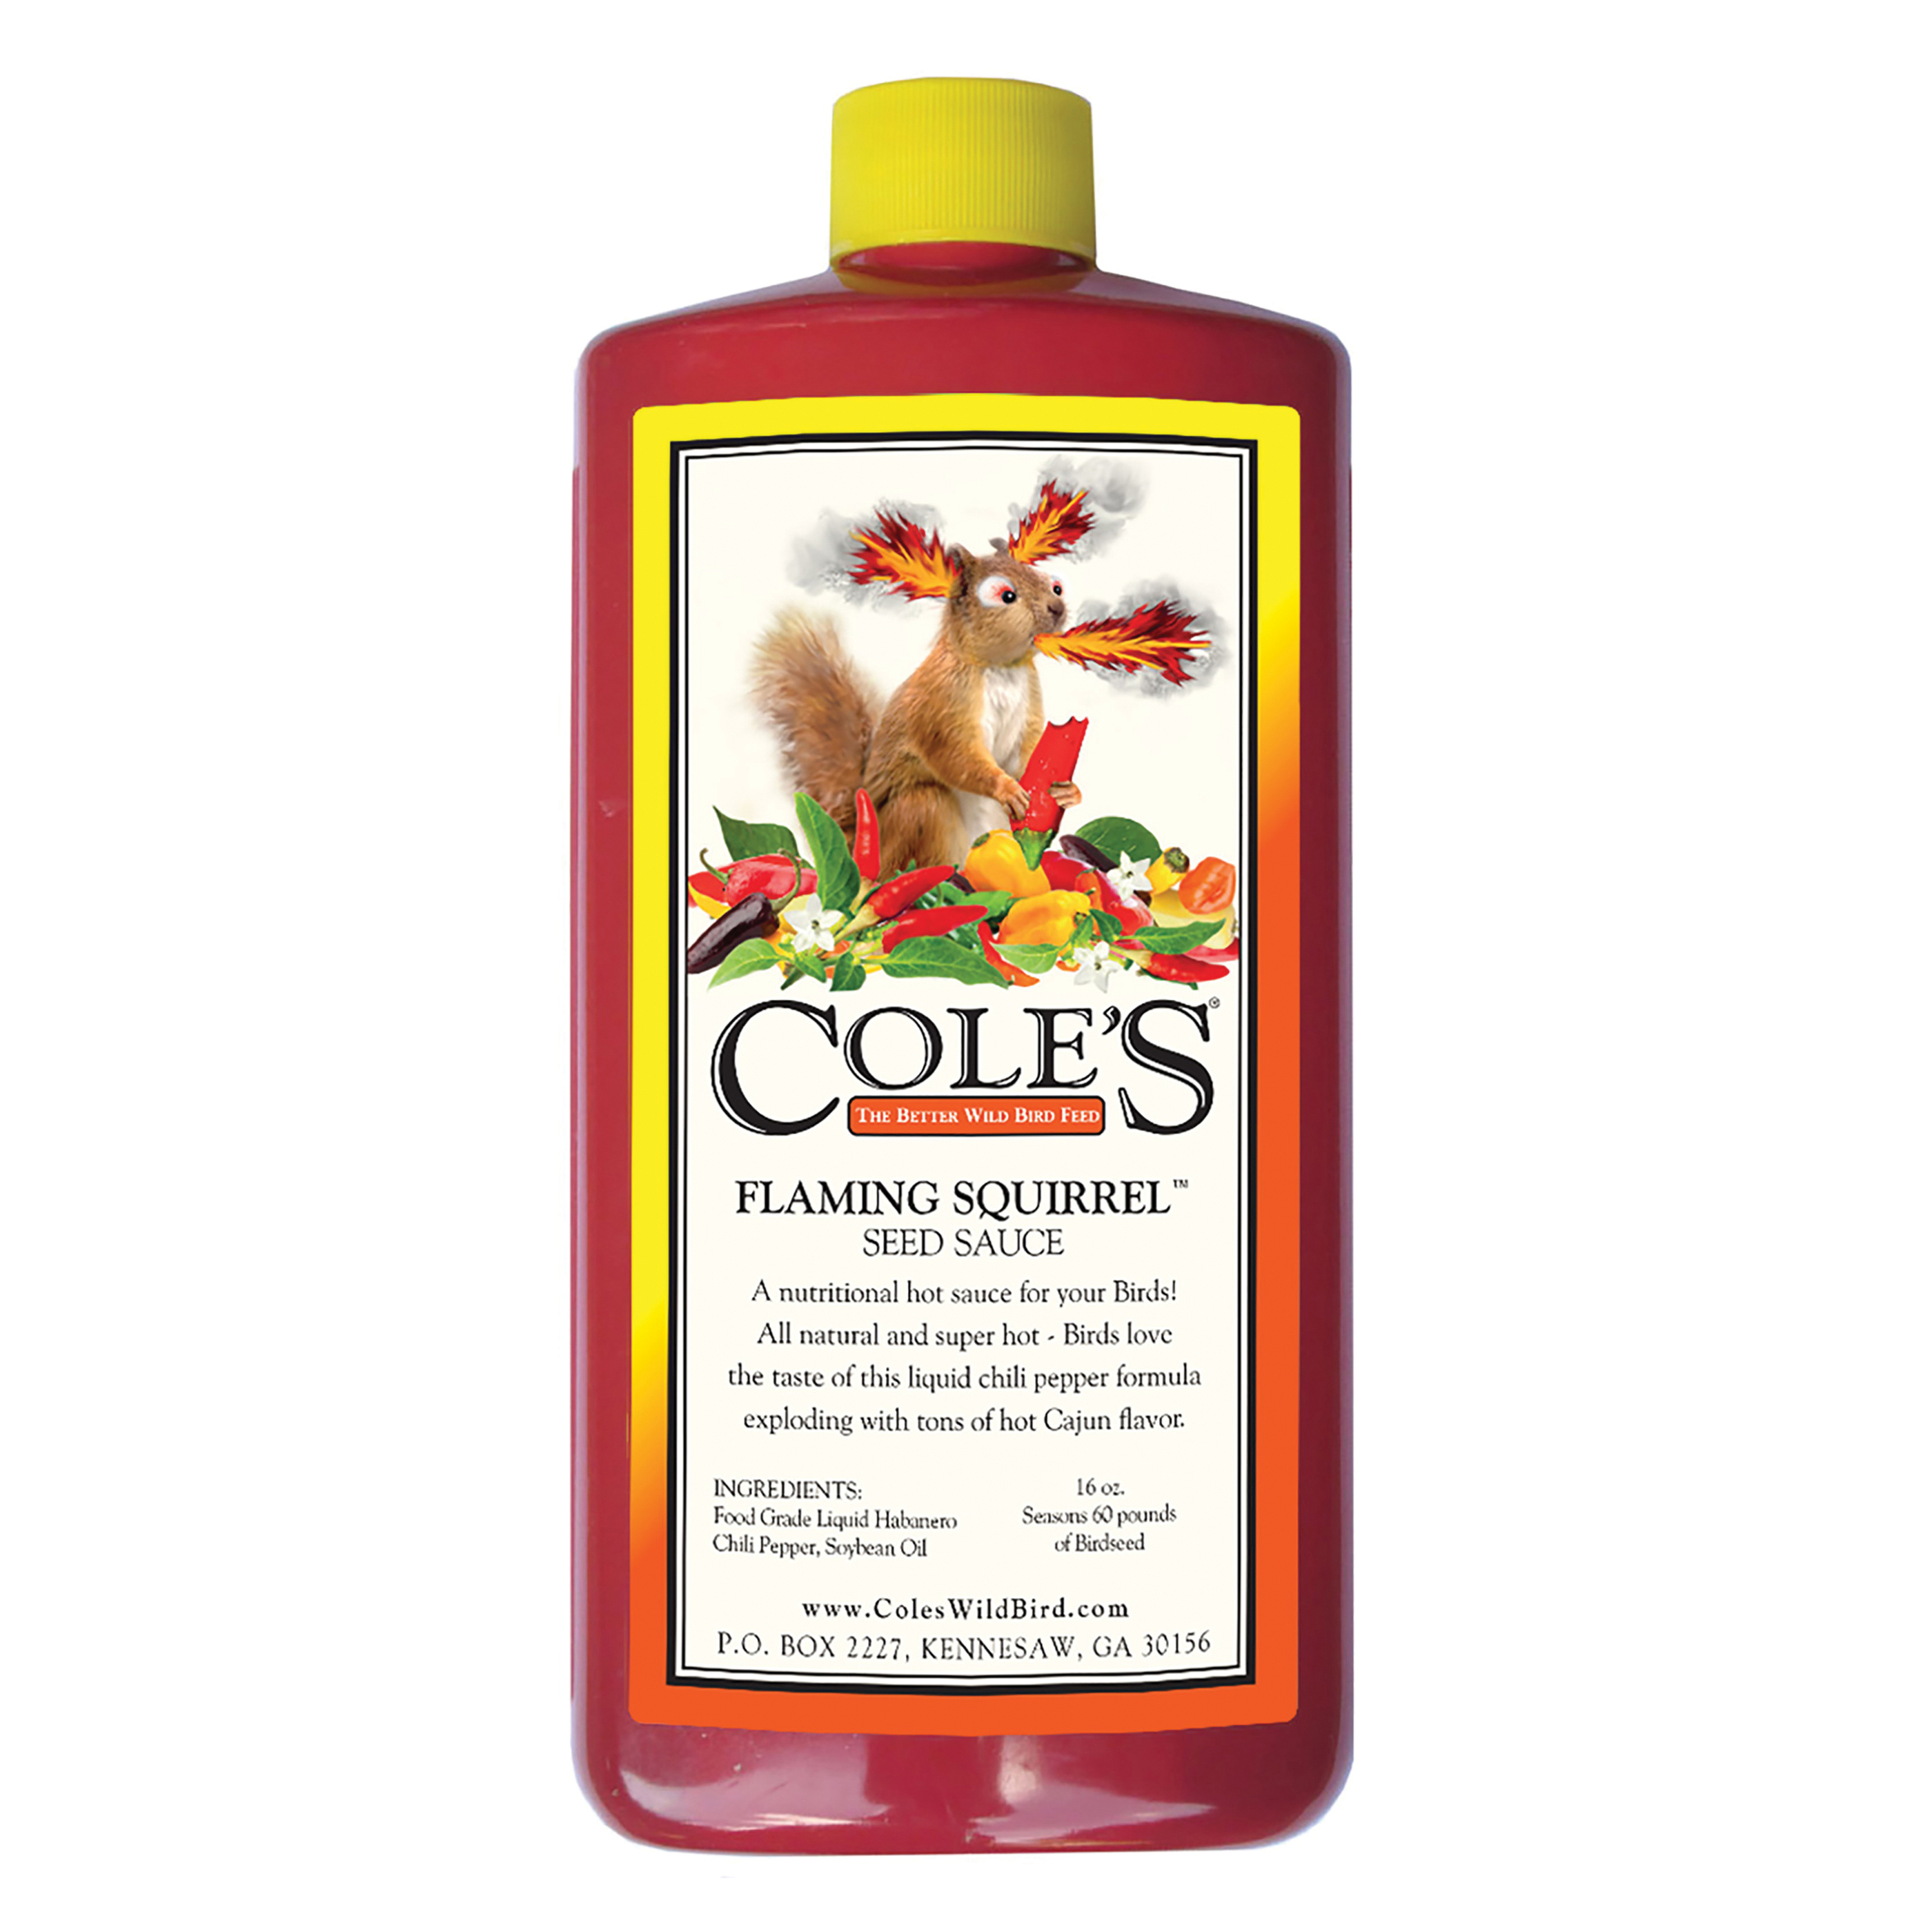 Cole's Flaming Squirrel Seed Sauce FS16 Bird Seed, Cajun Flavor, 16 oz Bottle